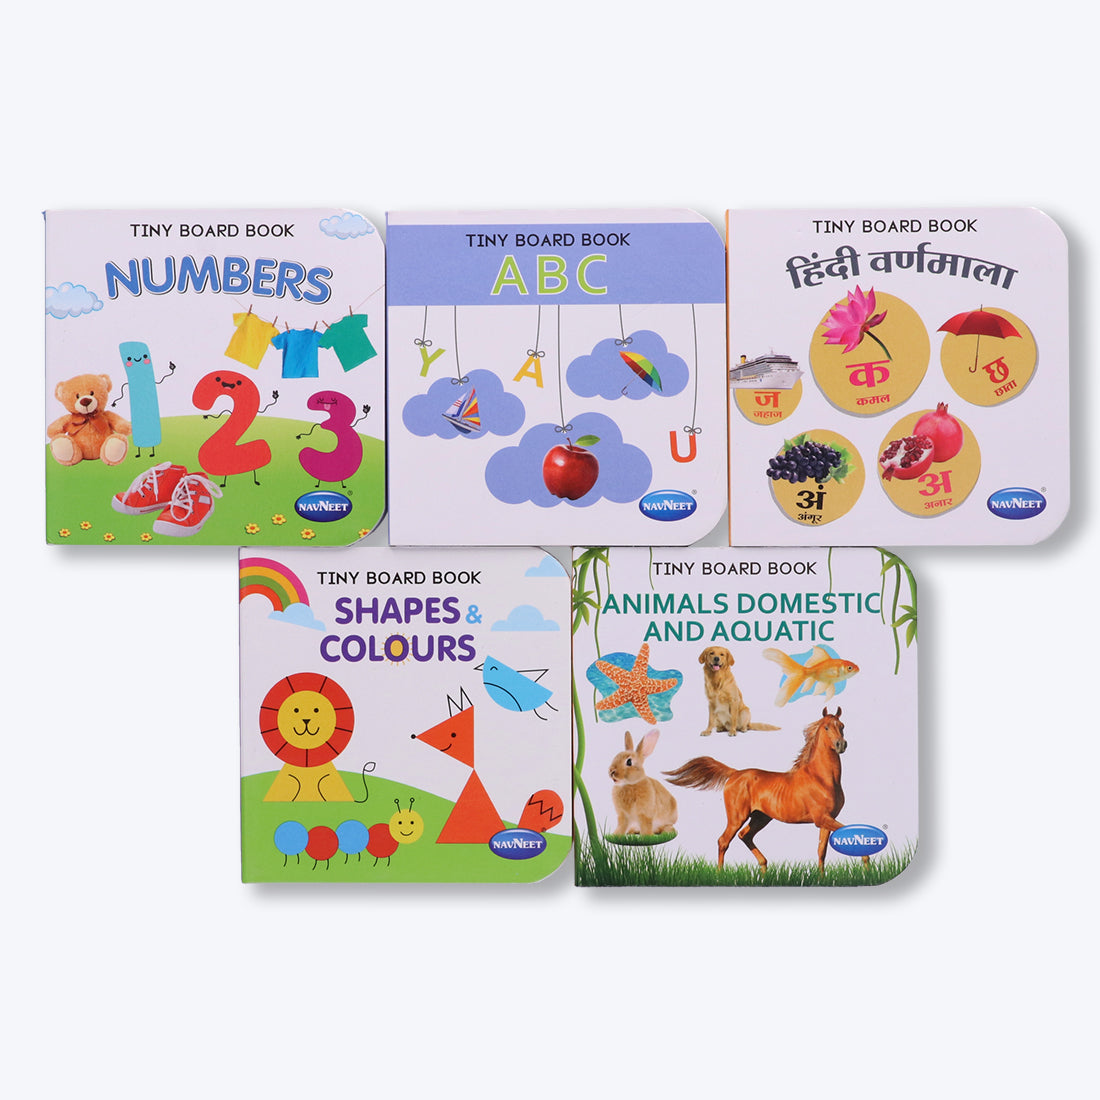 Navneet Tiny Board Book Library- Best Picture board books for babies & toddlers: 5 Books- ABC, Numbers, Hindi Varnamala, Shapes and Colours,Domestic and Aquatic animals- Early Learning Books